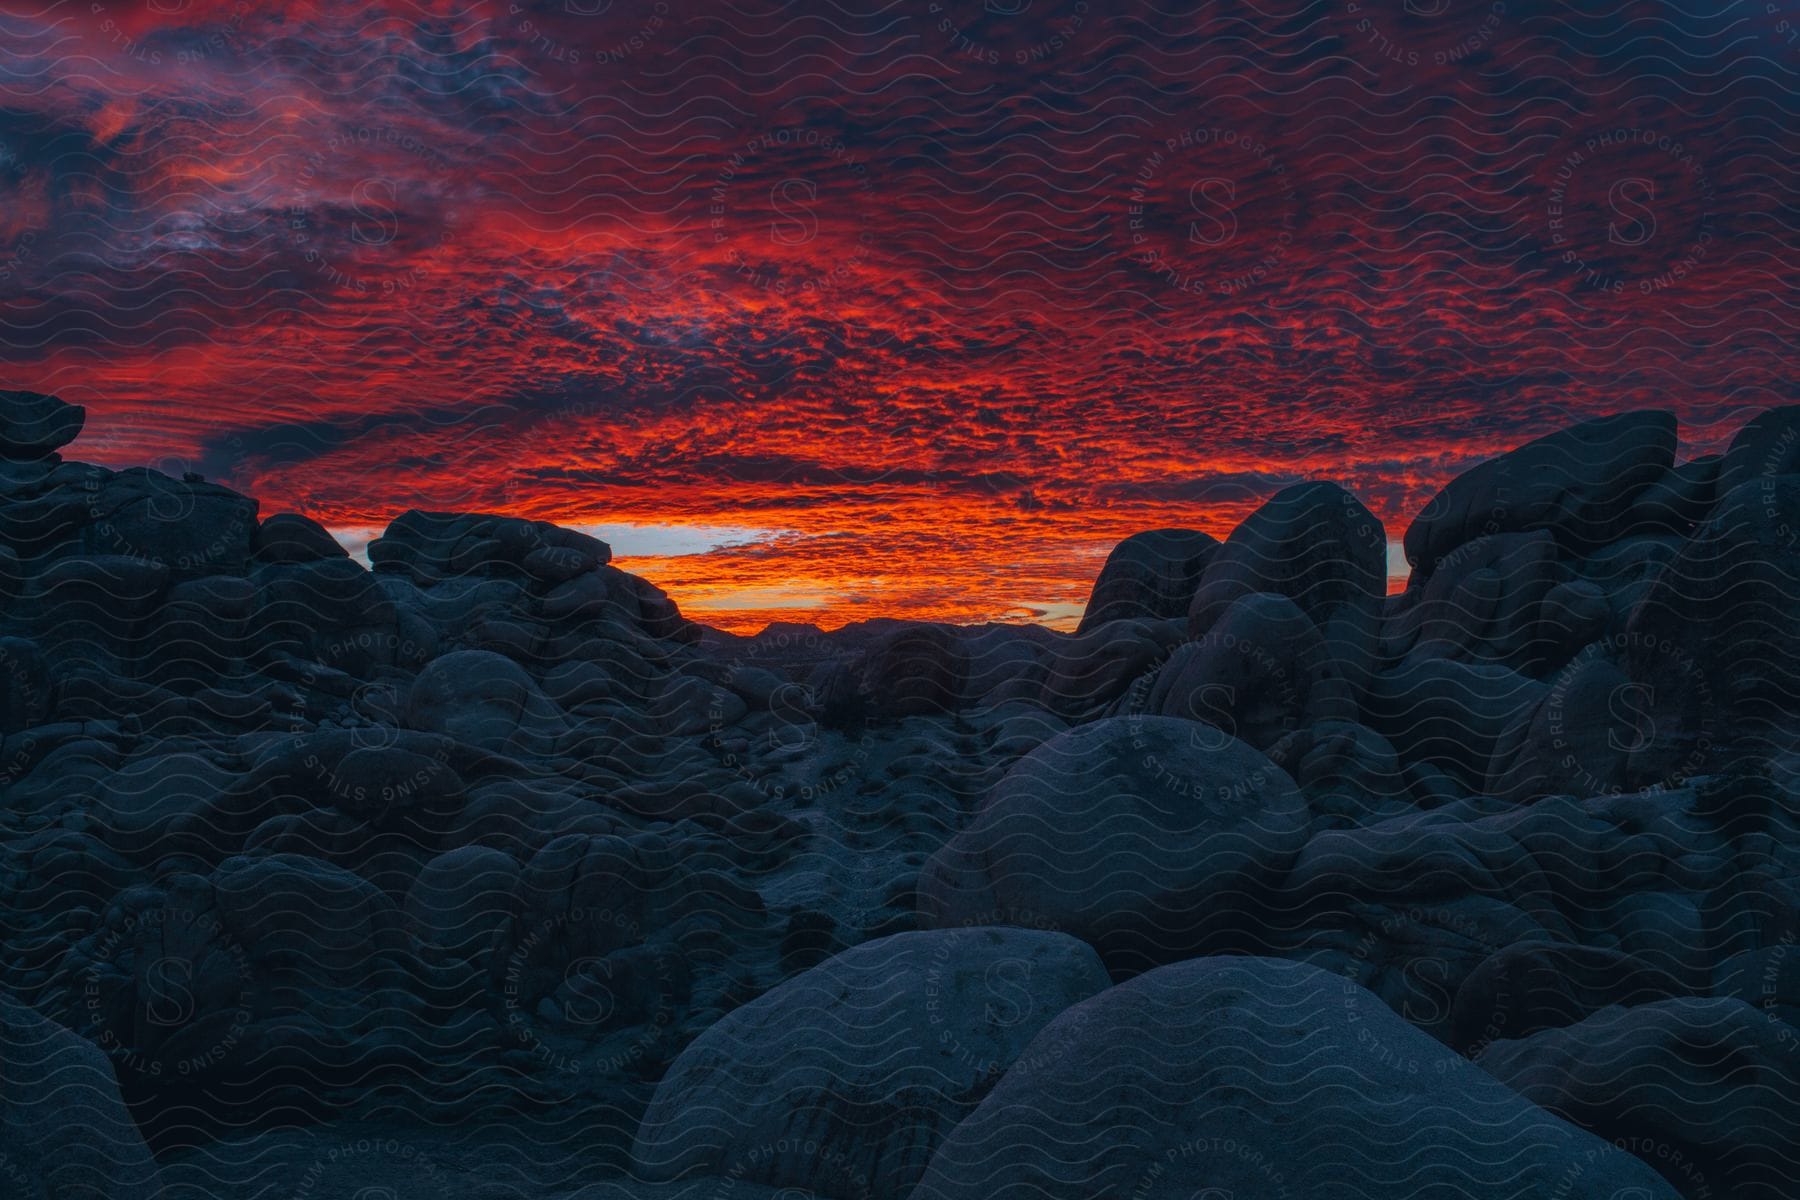 Large rocks and boulders under a cloudy sky at sunset